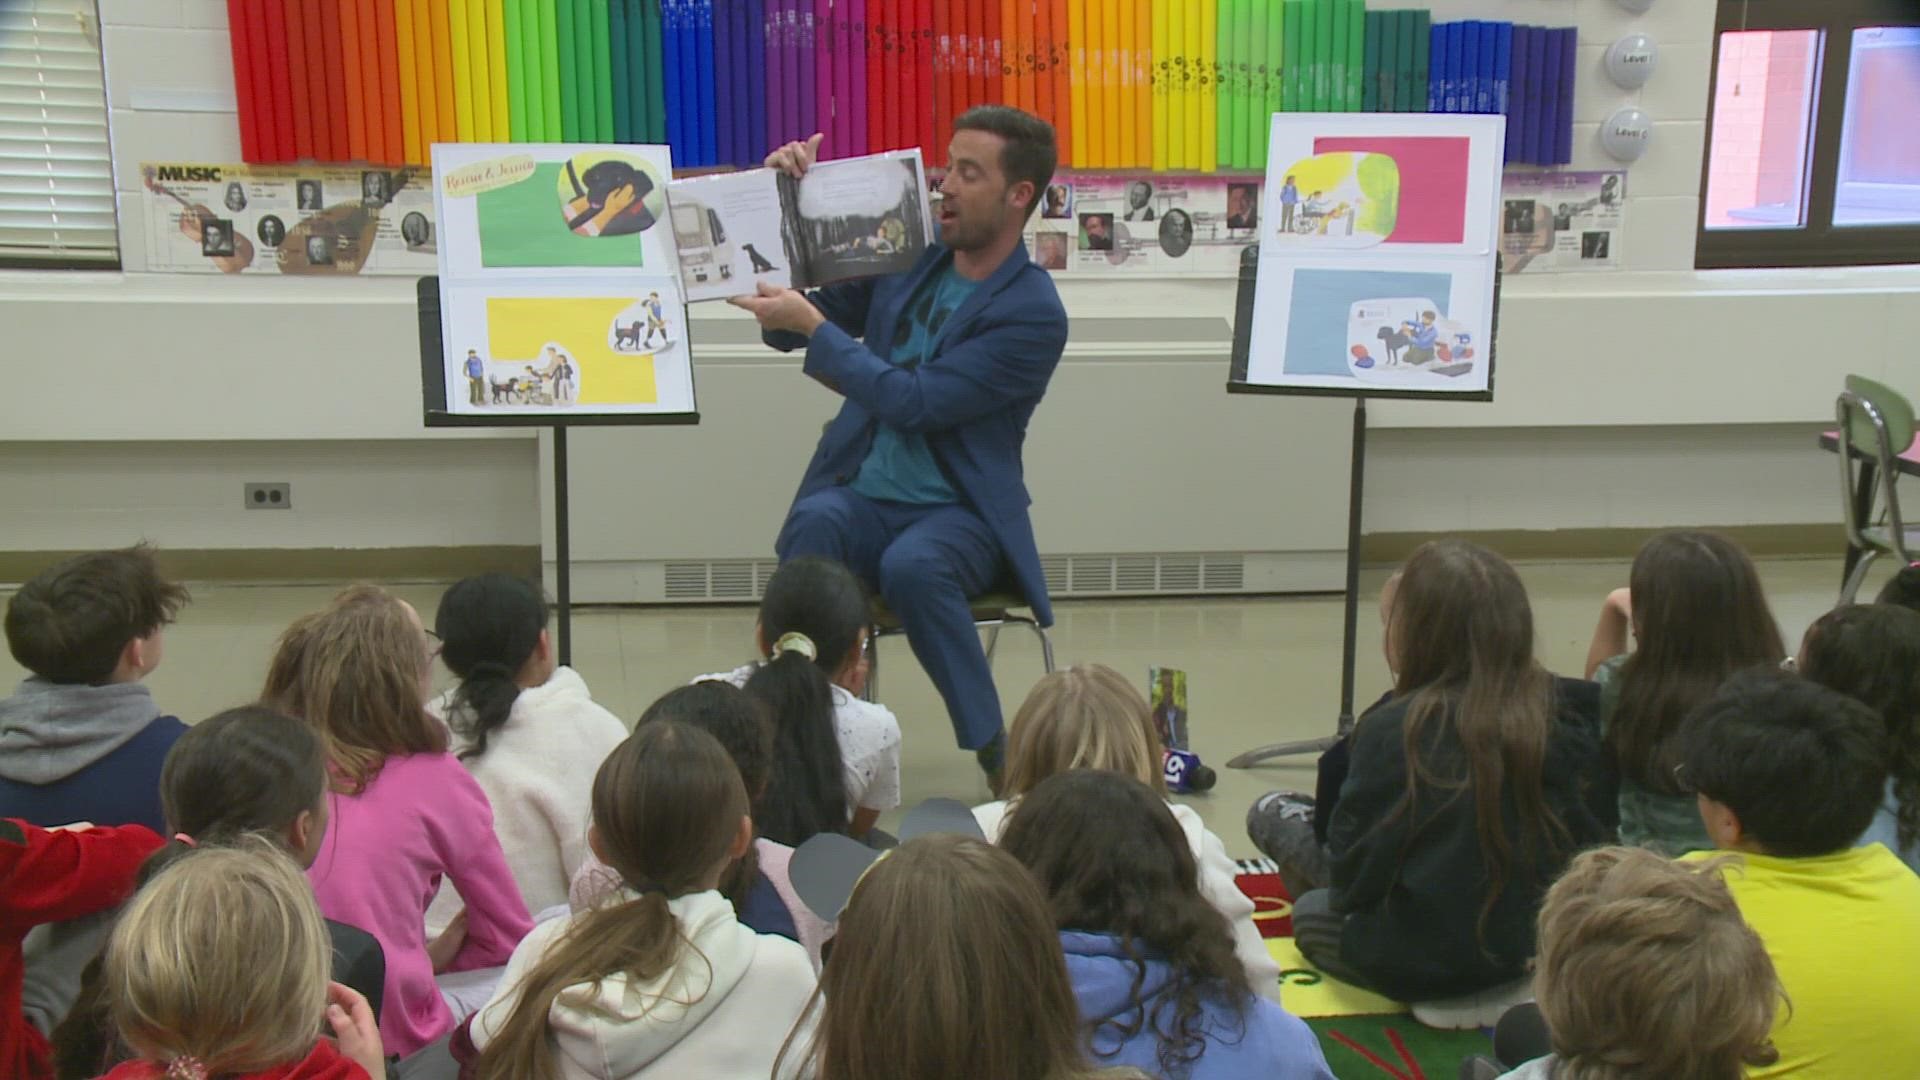 It's Read Across America Day and FOX61's Keith McGilvery was at South Side Elementary School in Bristol.